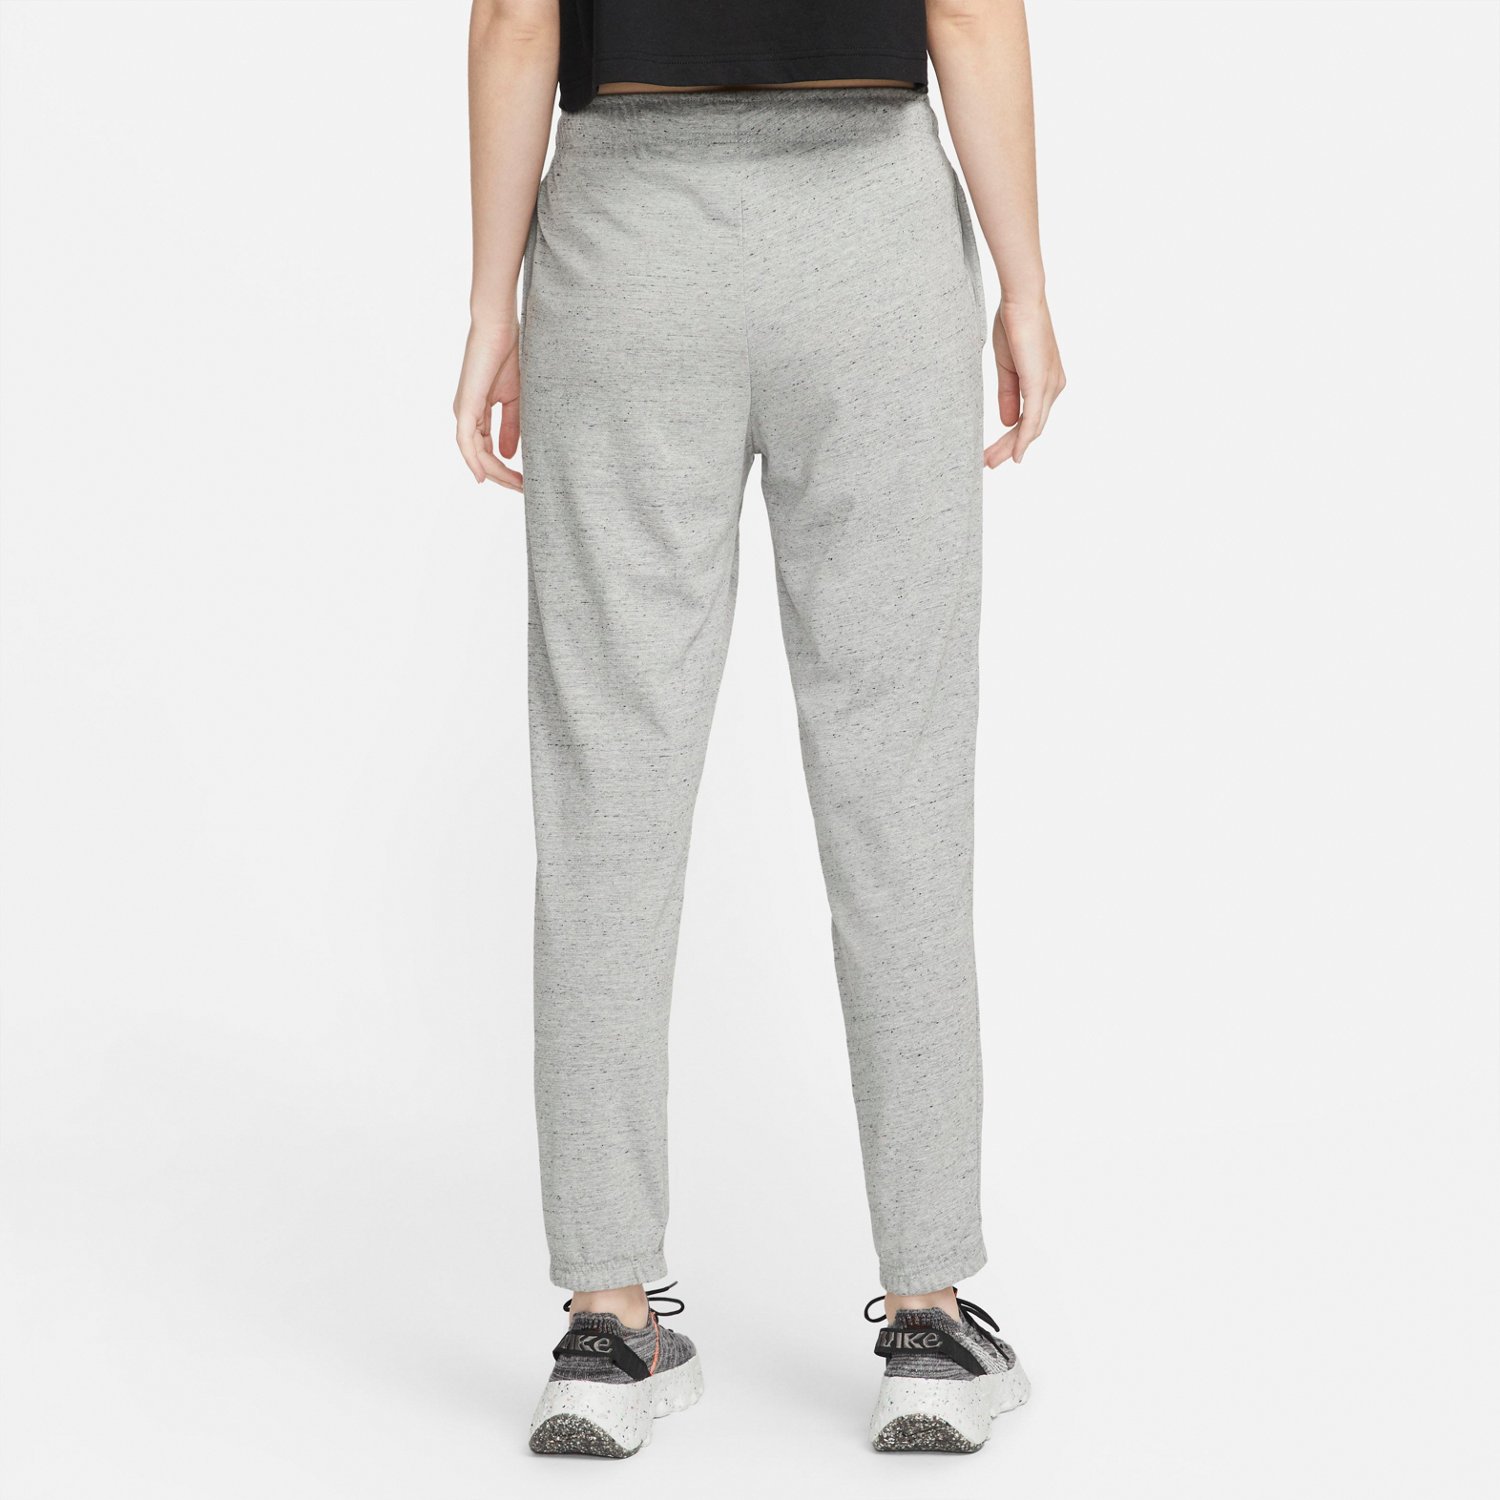 Nike Women's Gym Vintage Pants | Free Shipping at Academy